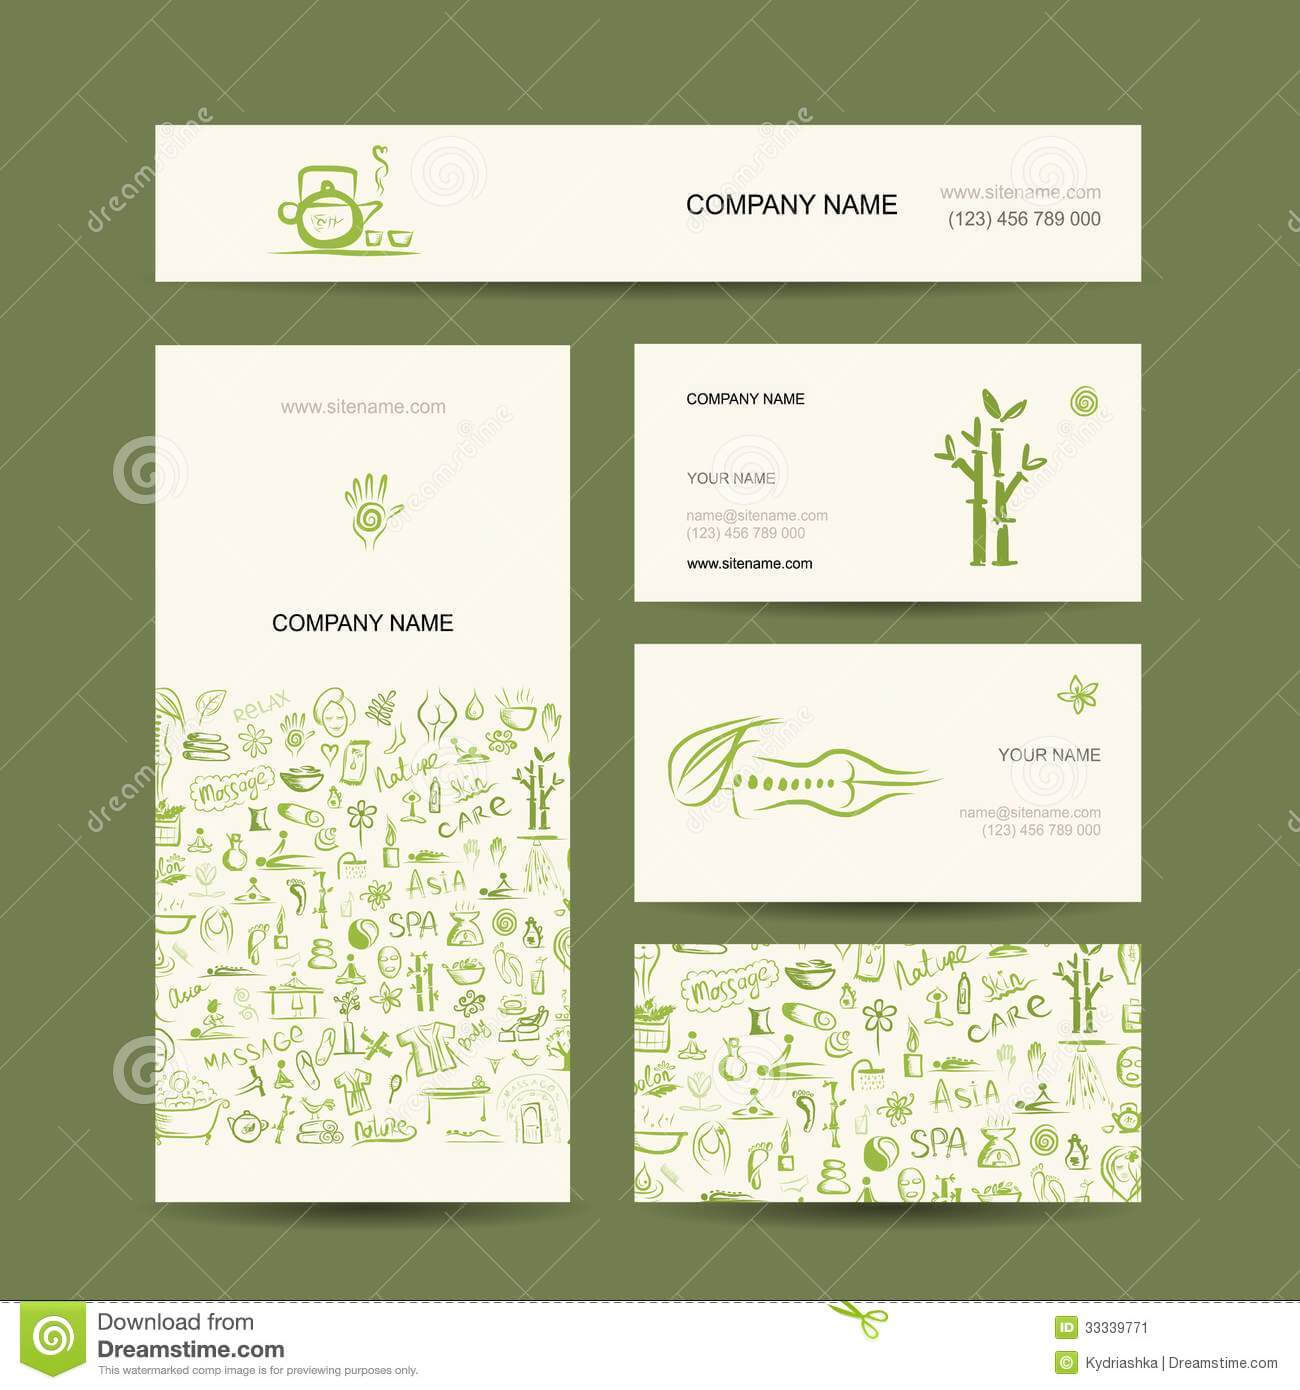 Massage Therapy Business Card Templates Free Sample Cards In Massage Therapy Business Card Templates